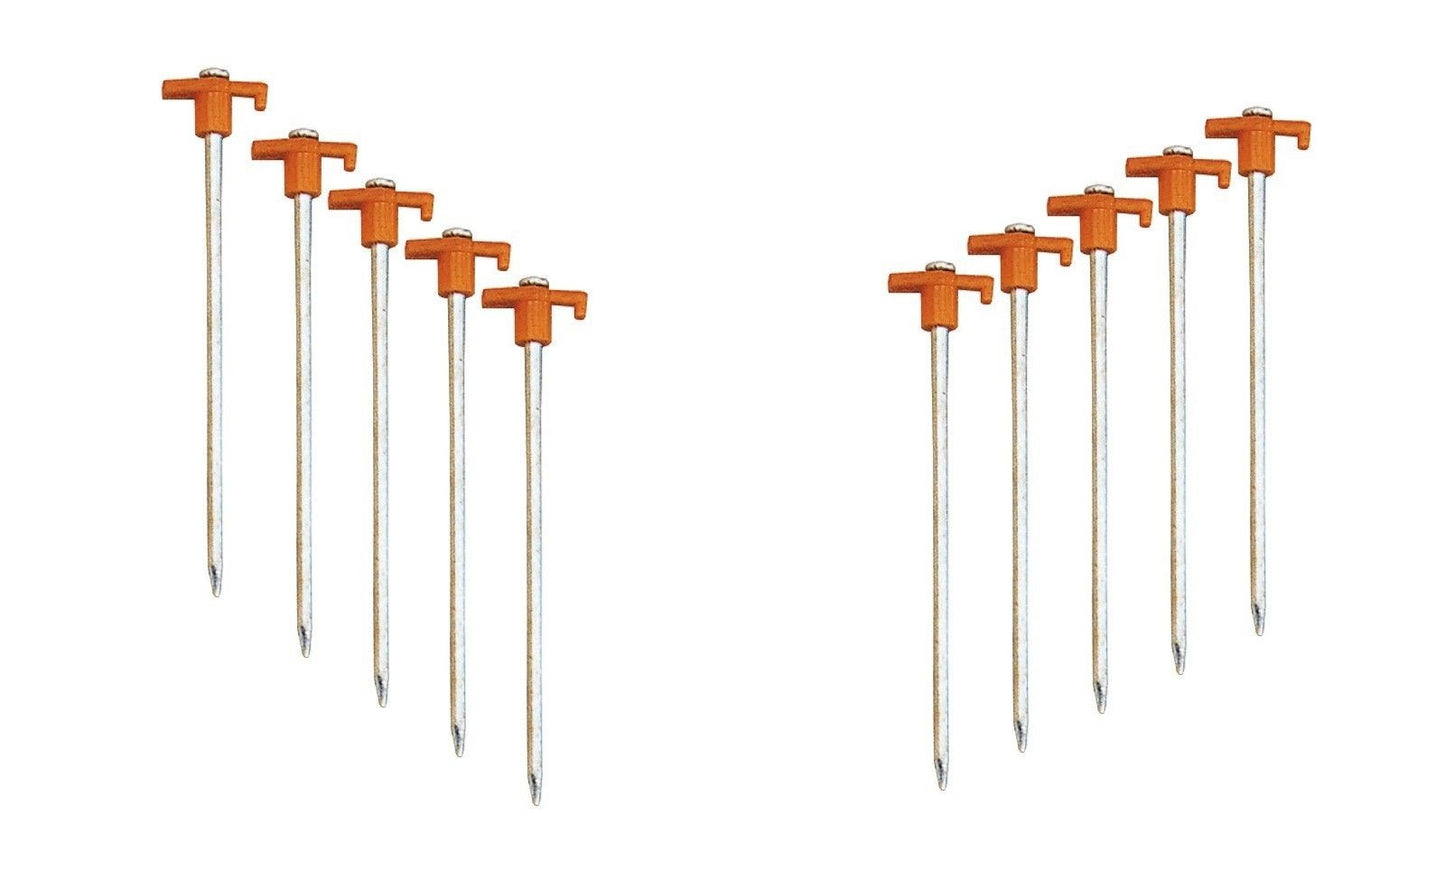 10 Inch Tent Stakes 10 Pack - Nail Head Spike For Easy Bracing - Tents Tarps Etc